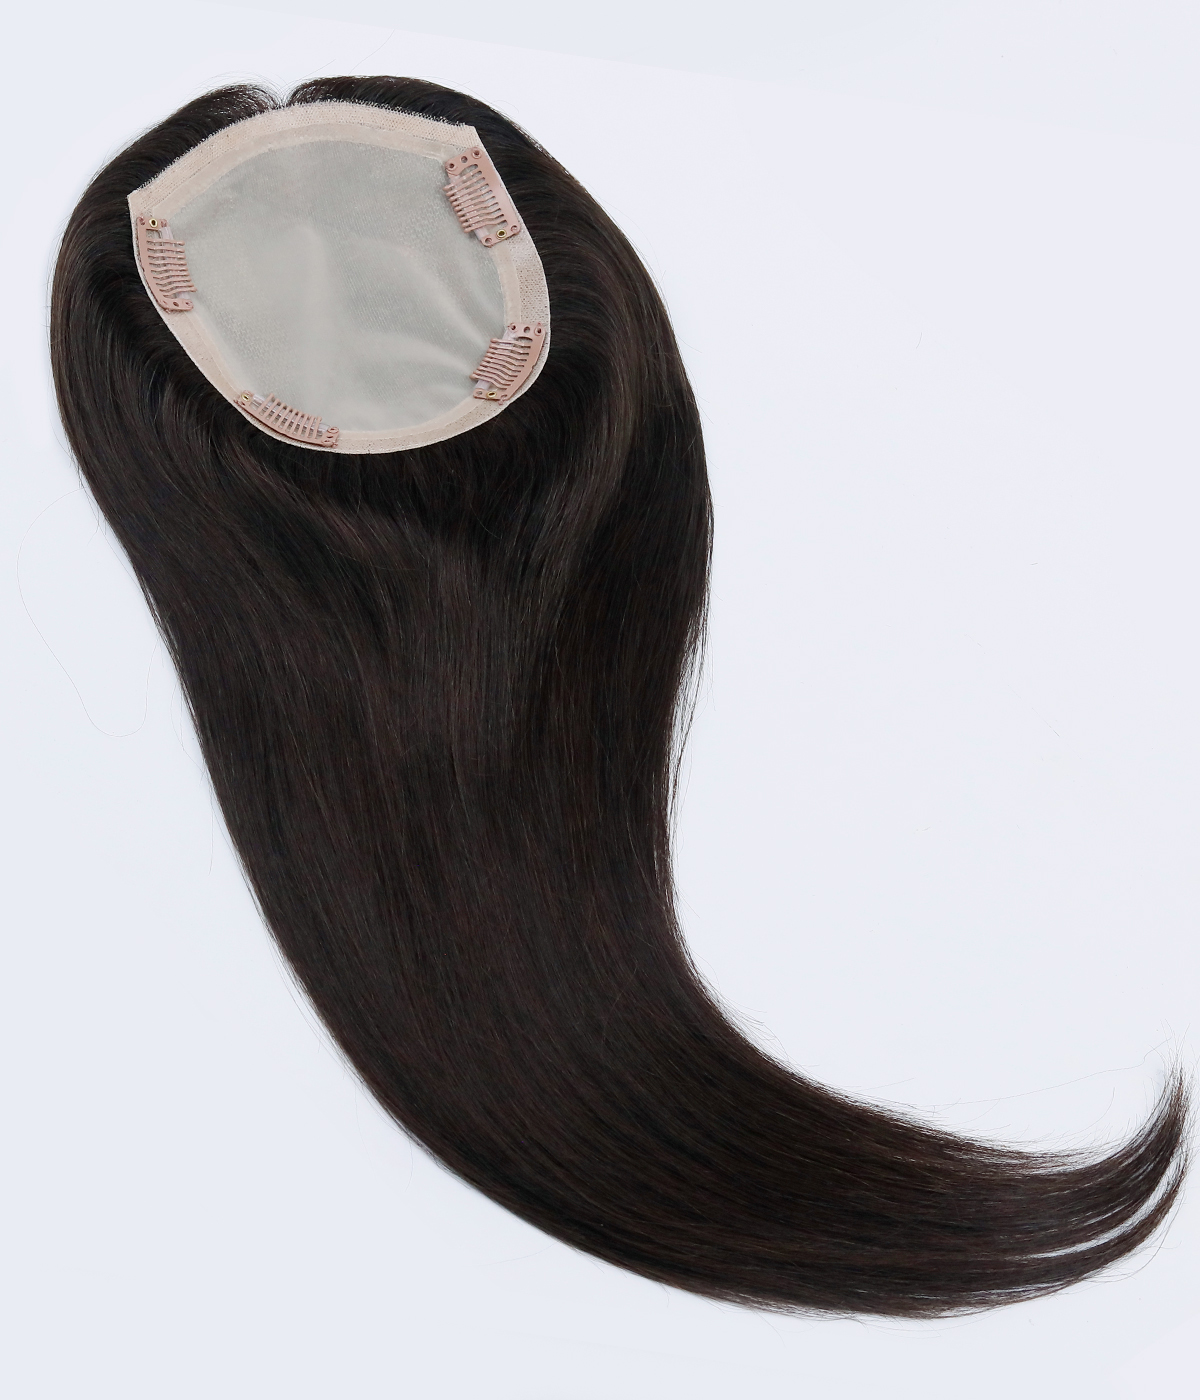 4.75"*5" Full Silk Base Human Hair Topper for Thinning Top